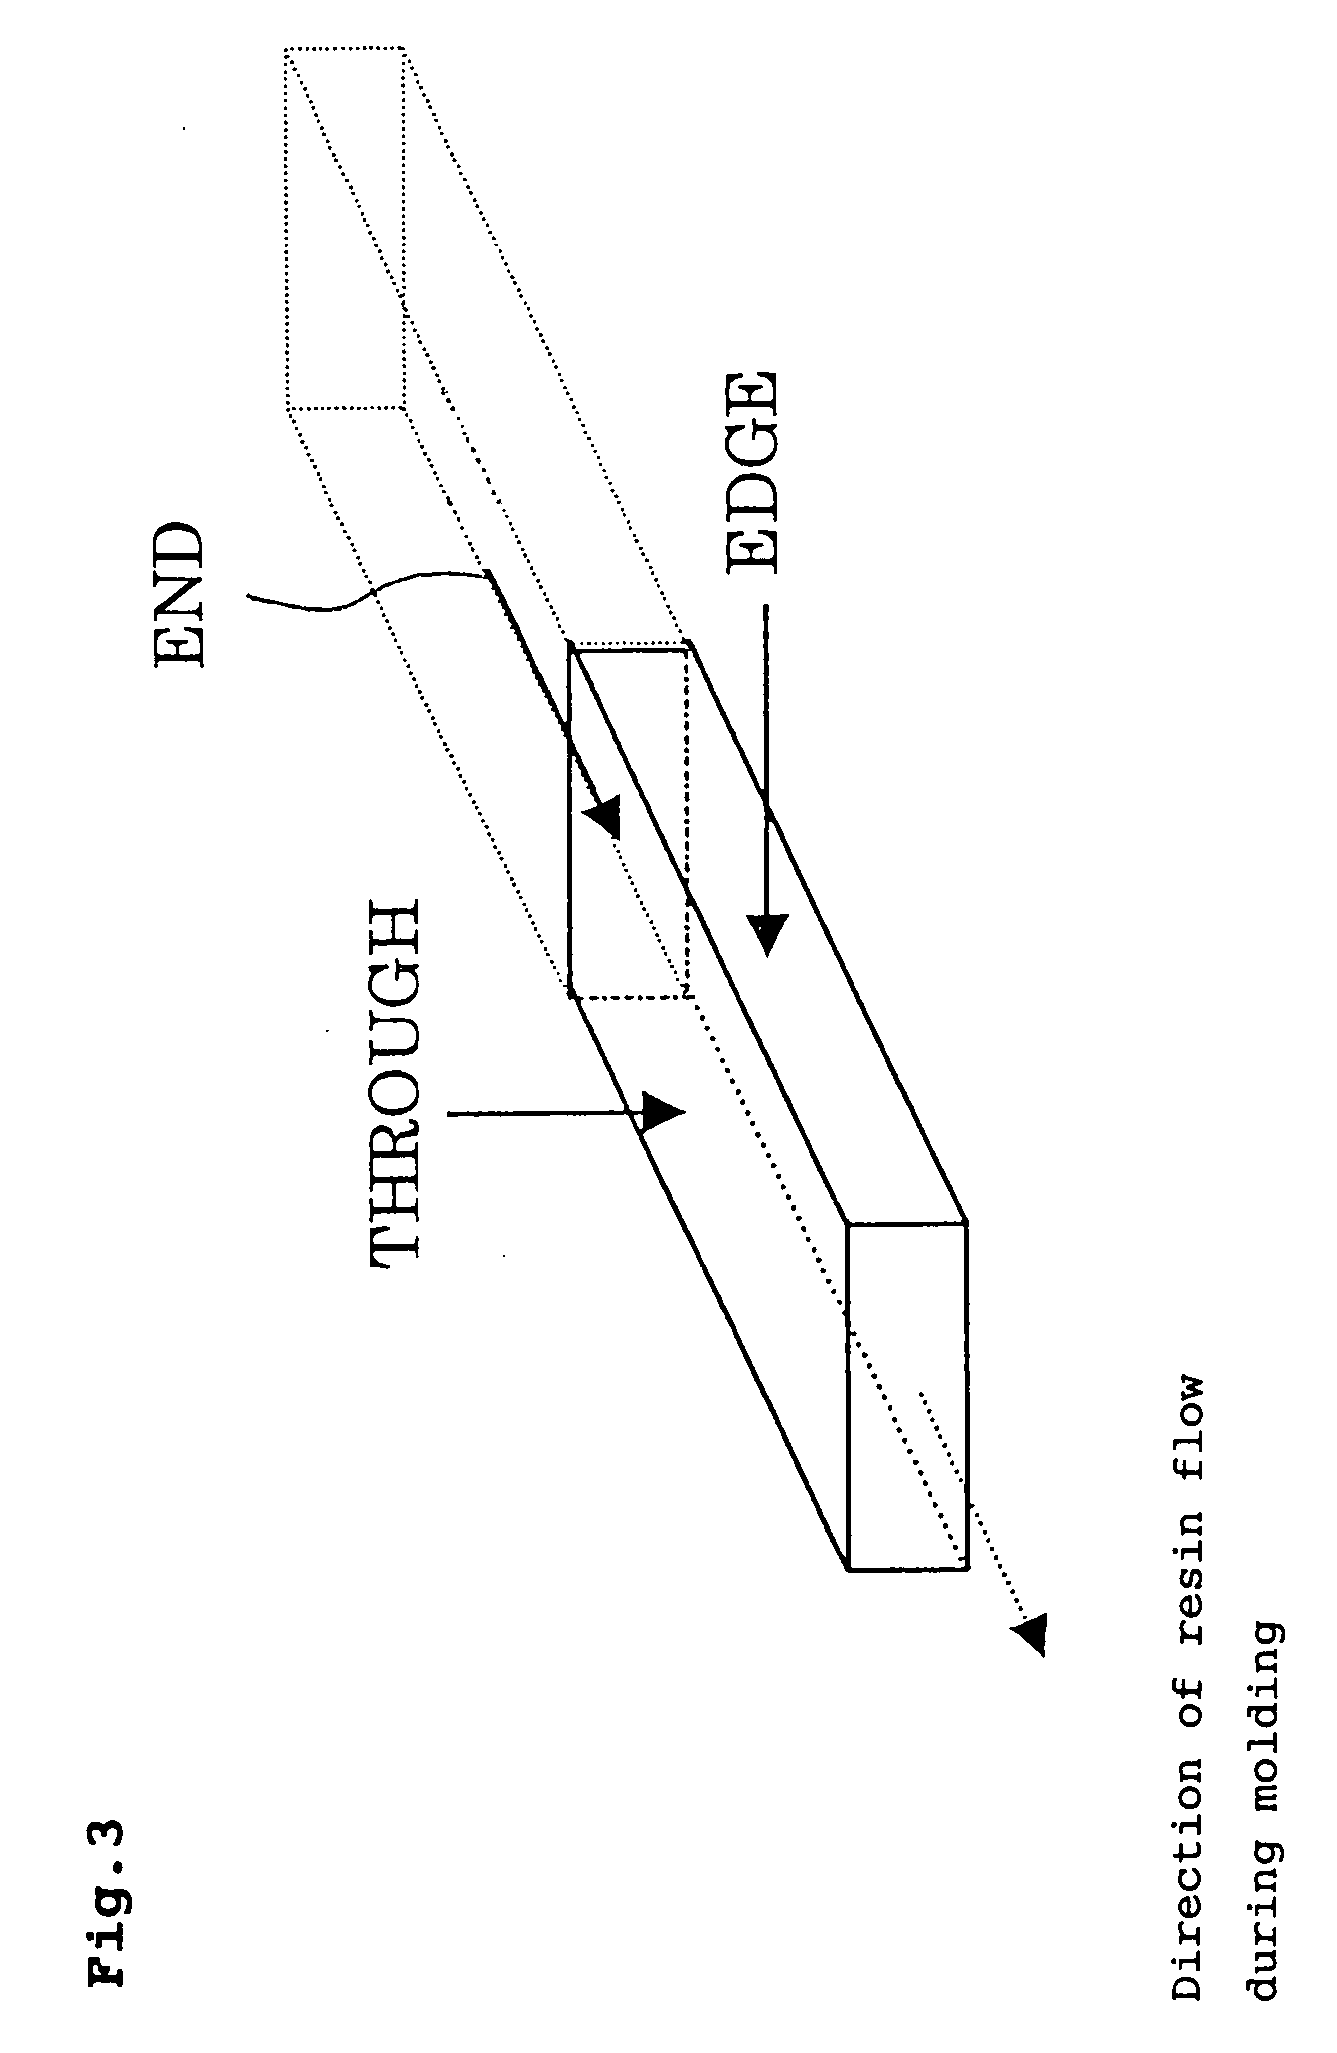 Polypropylene-based resin molded article and process for producing the same